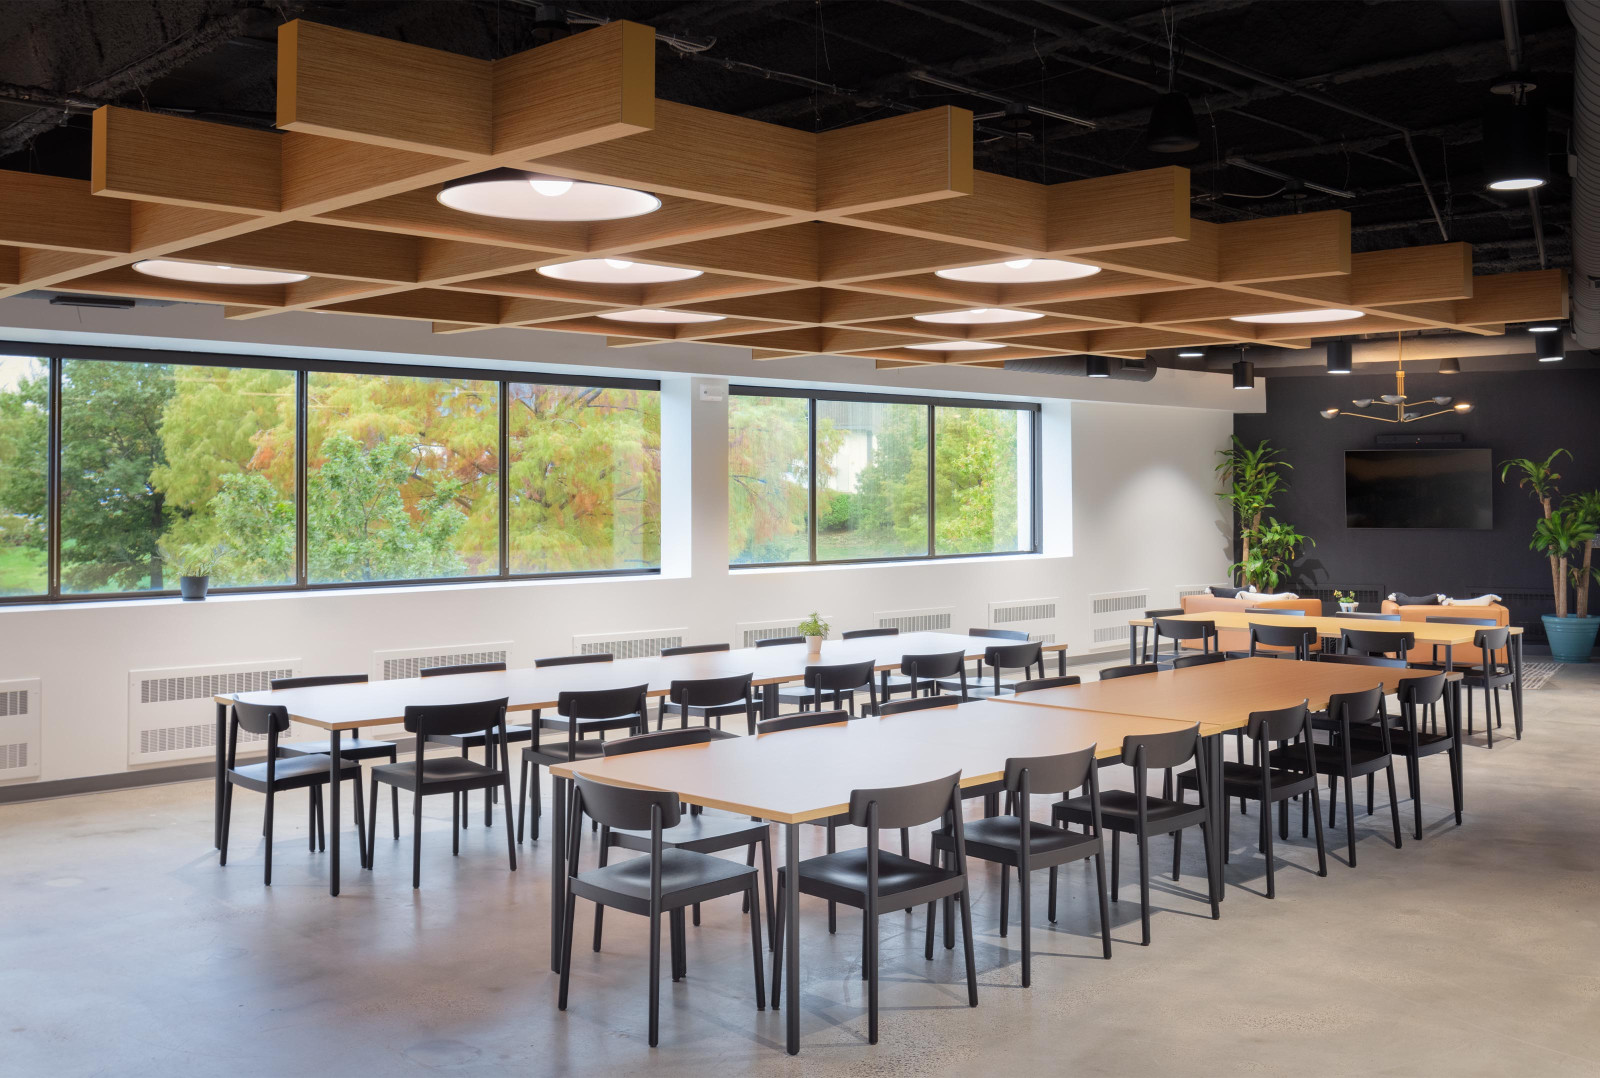 A conference room has two long tables with various black chairs. The ceiling’s panel system mimics the look of a wooden trellis.